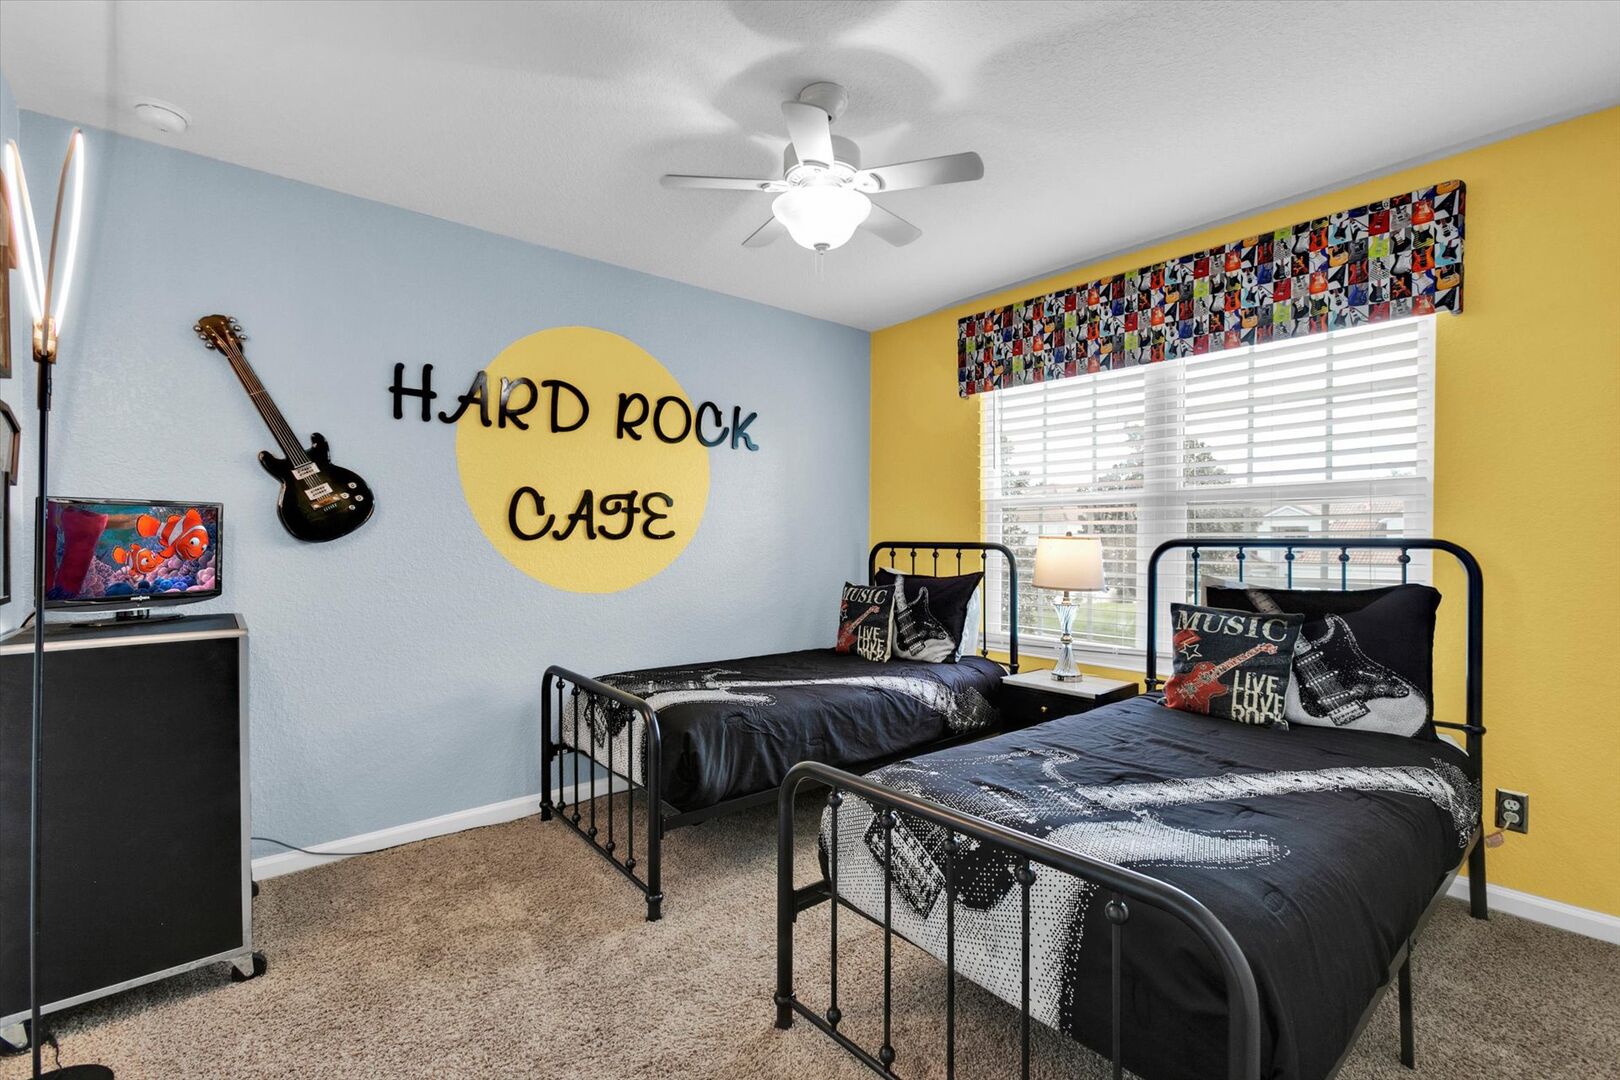 Two Twins Bedroom 5, Upstairs
Hard Rock Cafe Theme